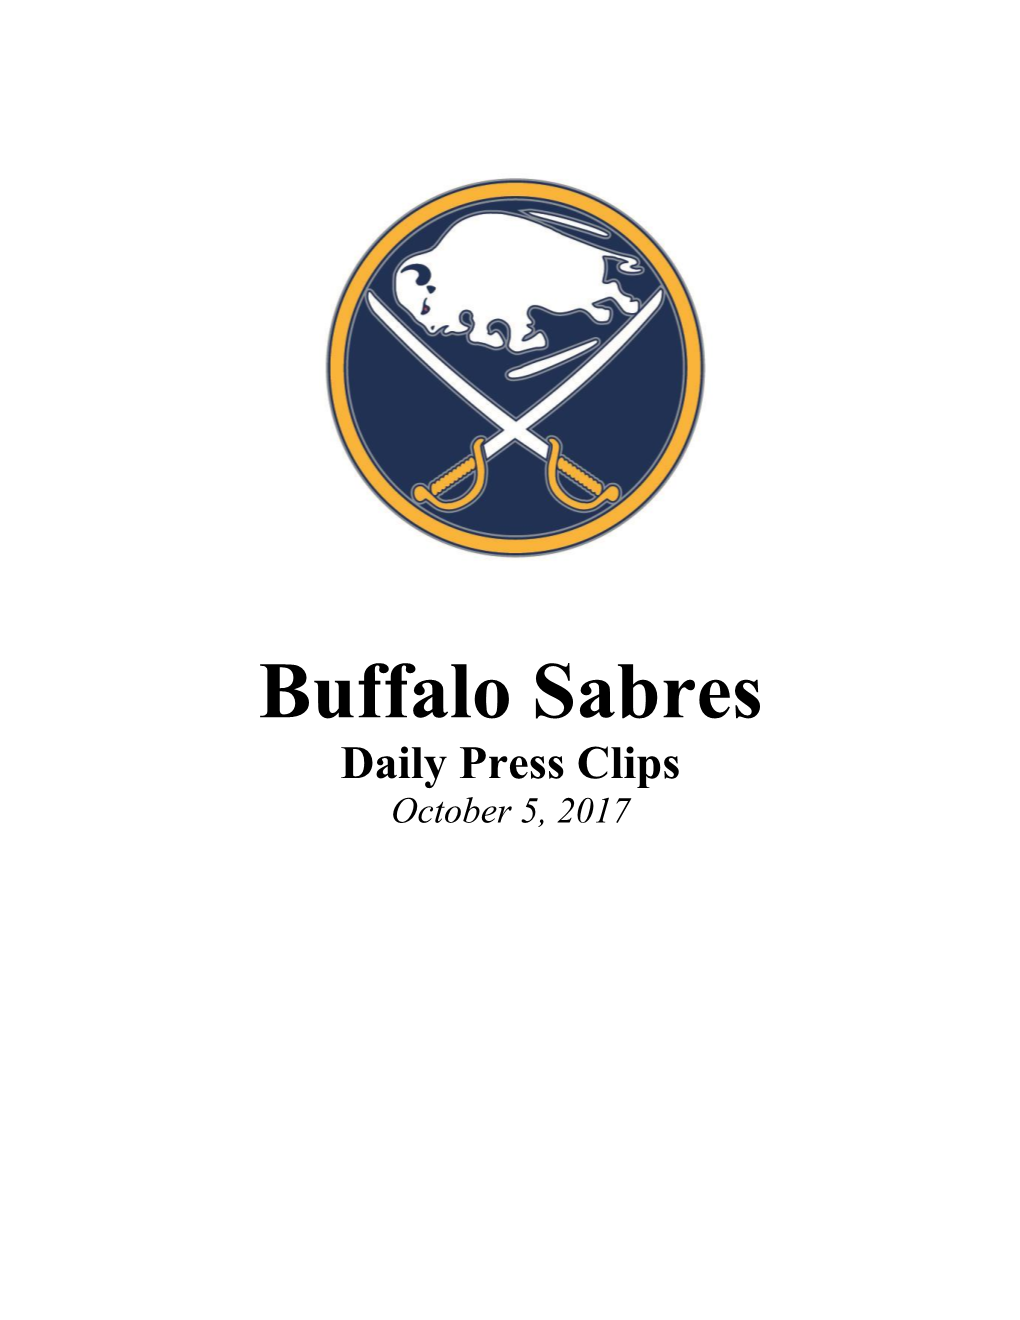 Daily Press Clips October 5, 2017